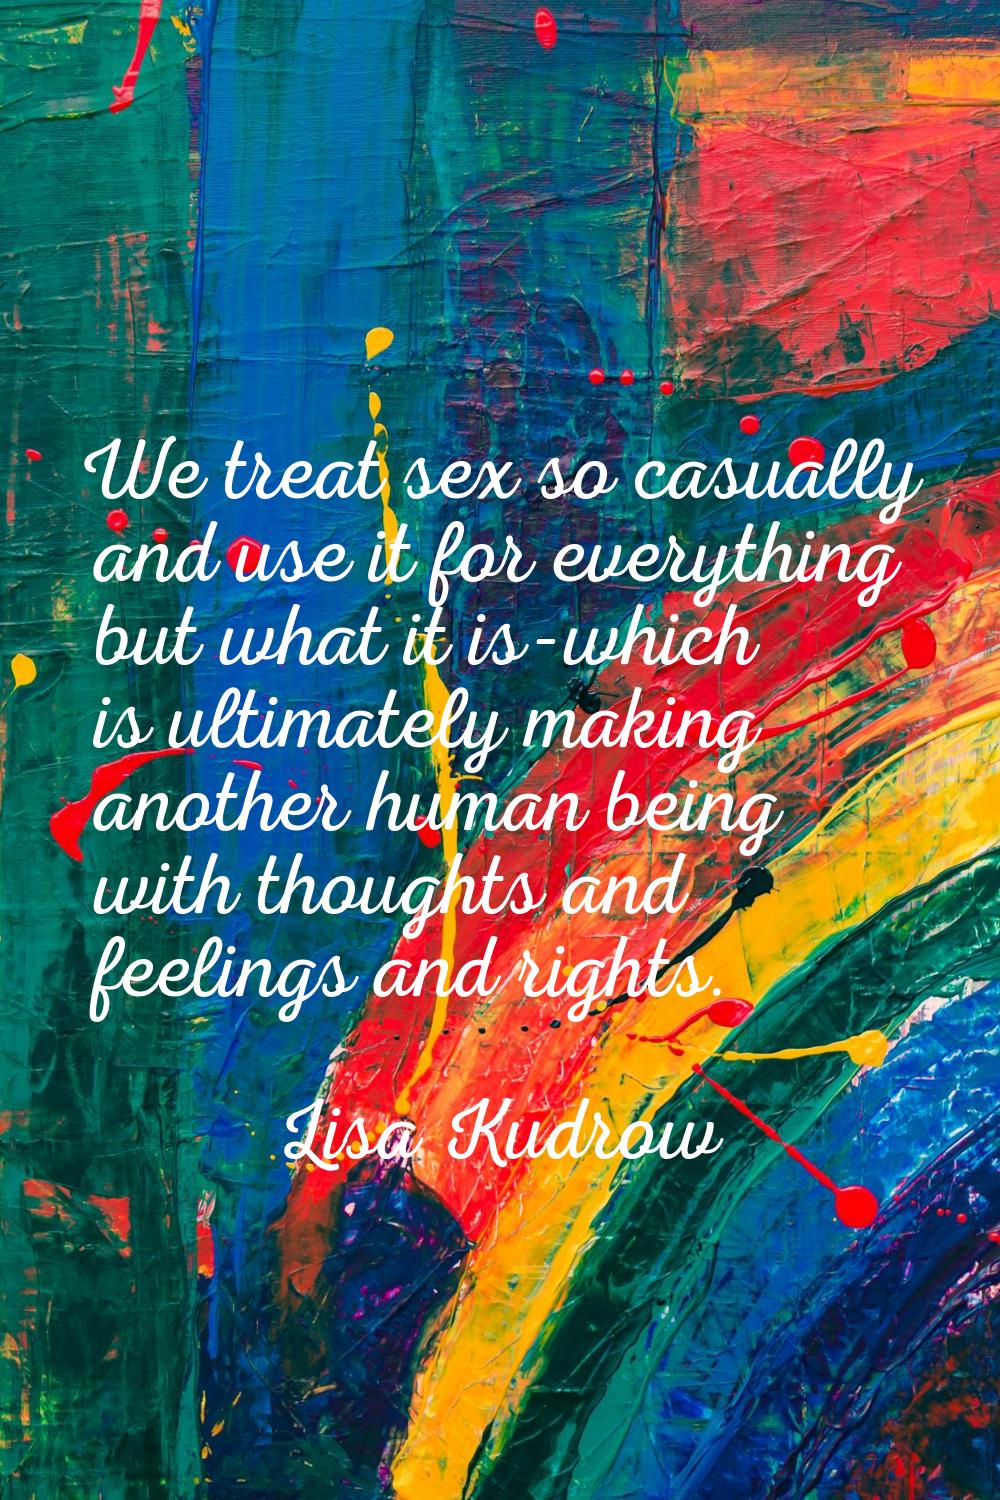 We treat sex so casually and use it for everything but what it is-which is ultimately making anothe